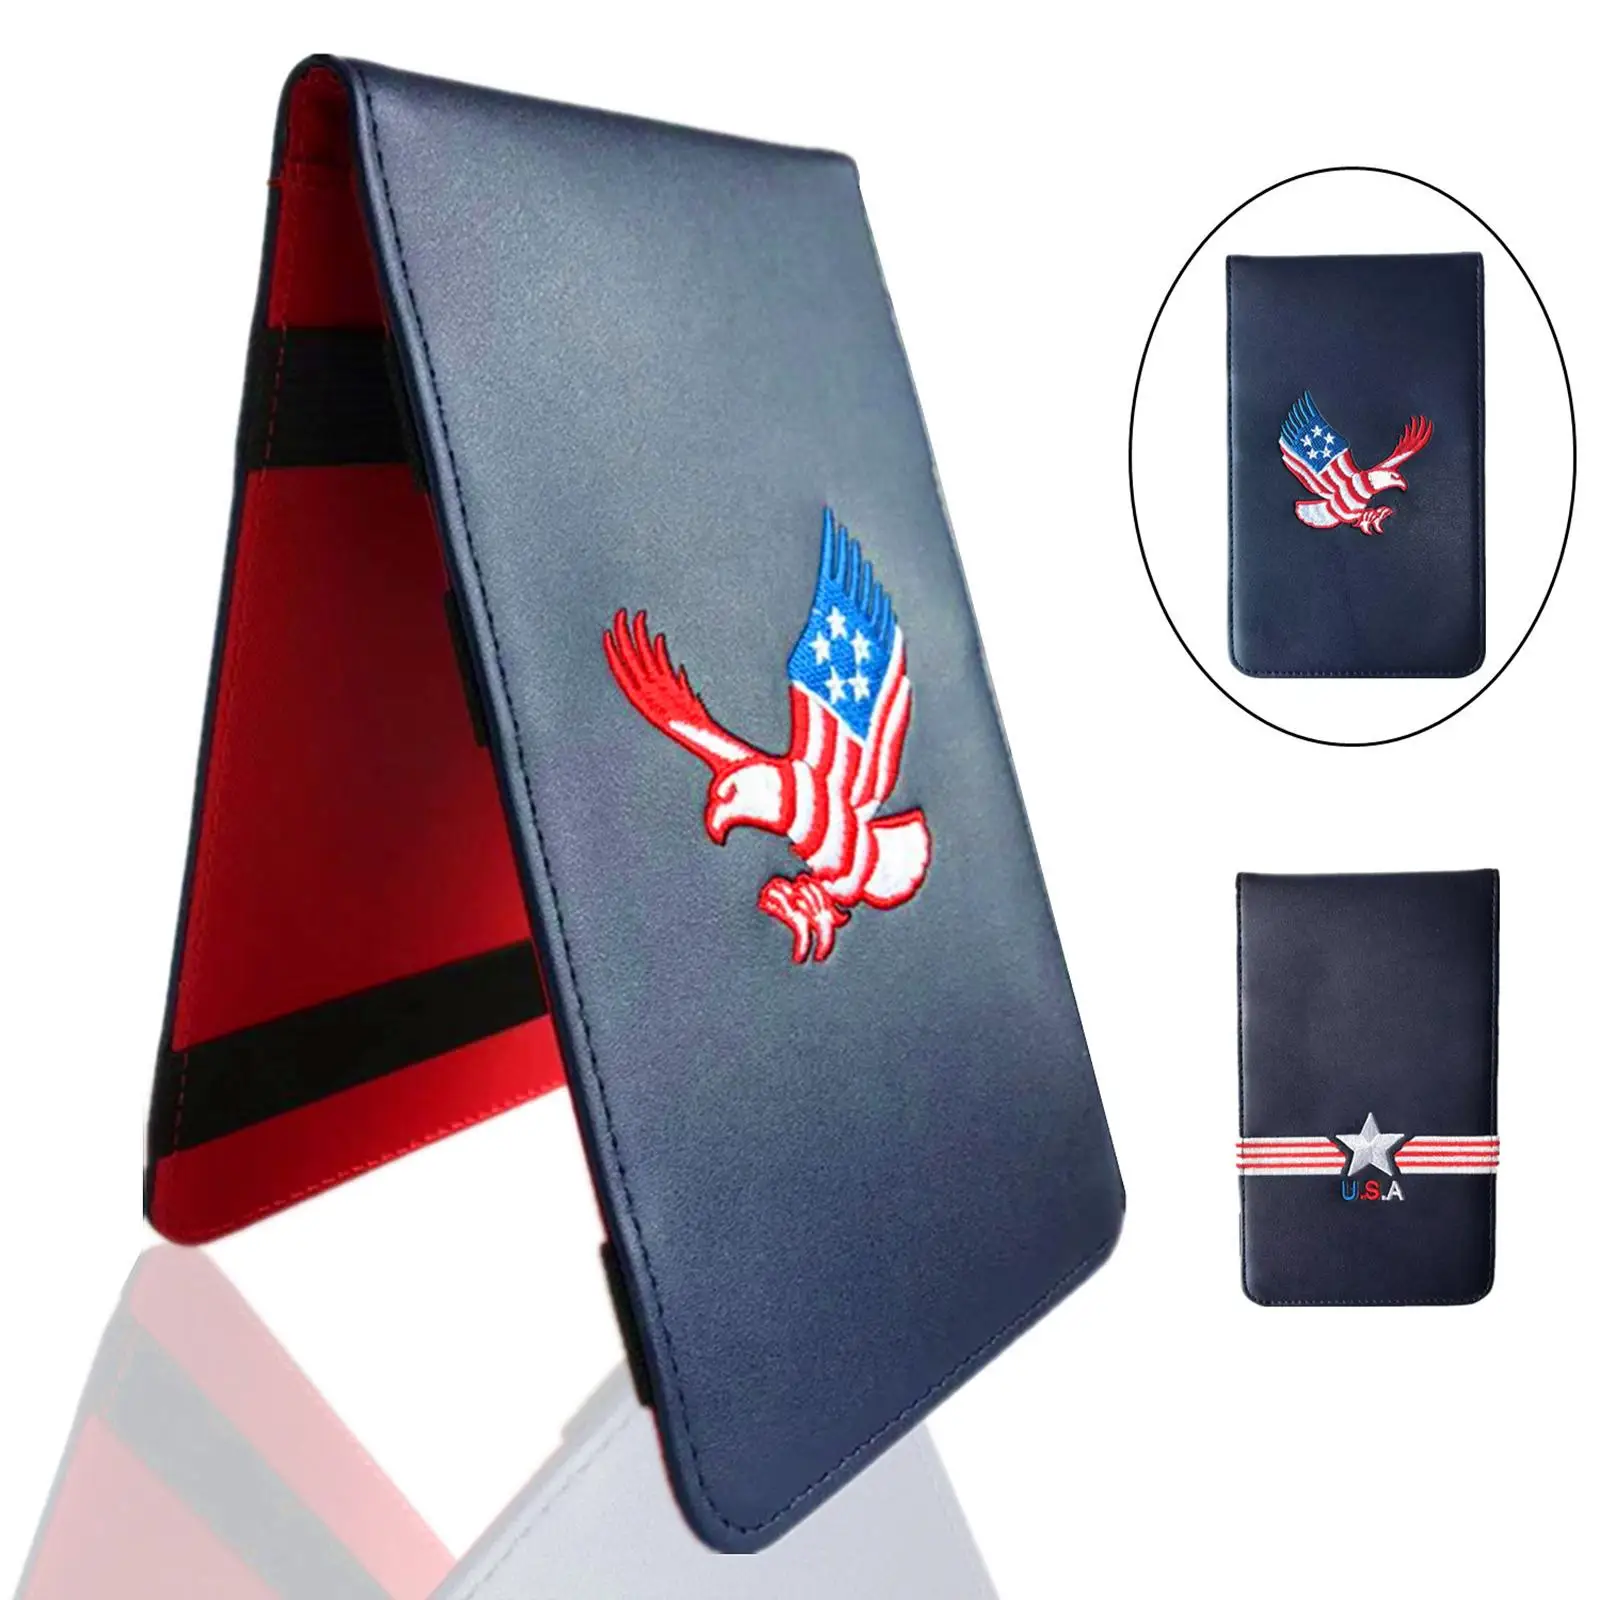 Golf Performance Scorecard Holder Embroidered Quality PU Leather Portable